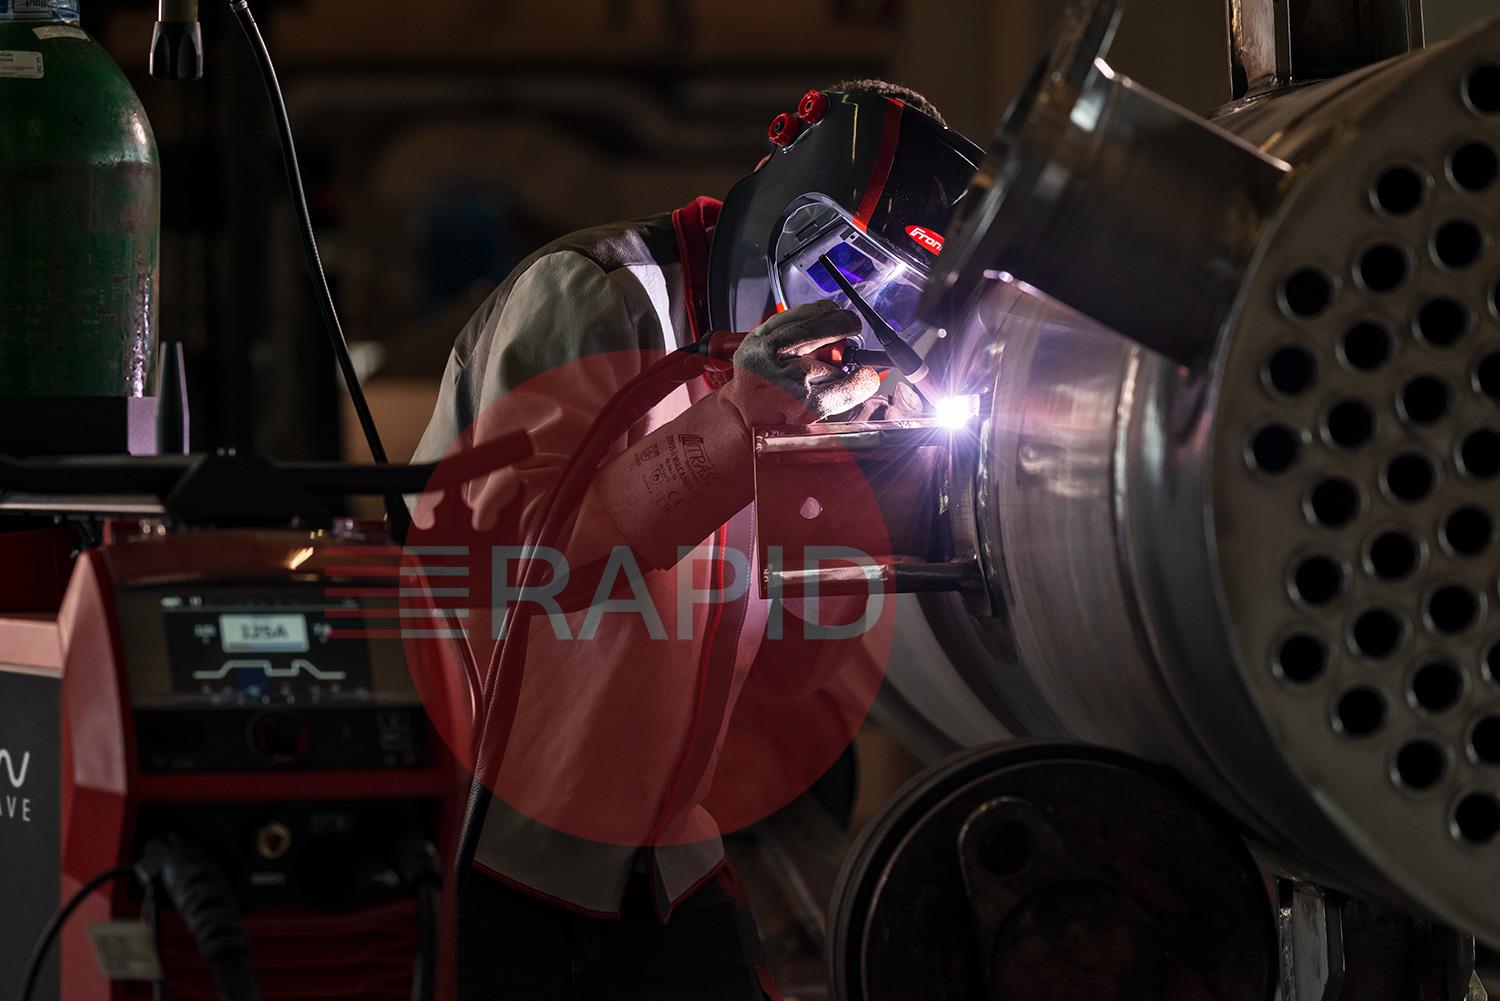 4,075,251PKGW  Fronius - iWave 400i AC/DC Water-Cooled TIG Welder Package, 400v, THP 400i TIG Torch & Earth